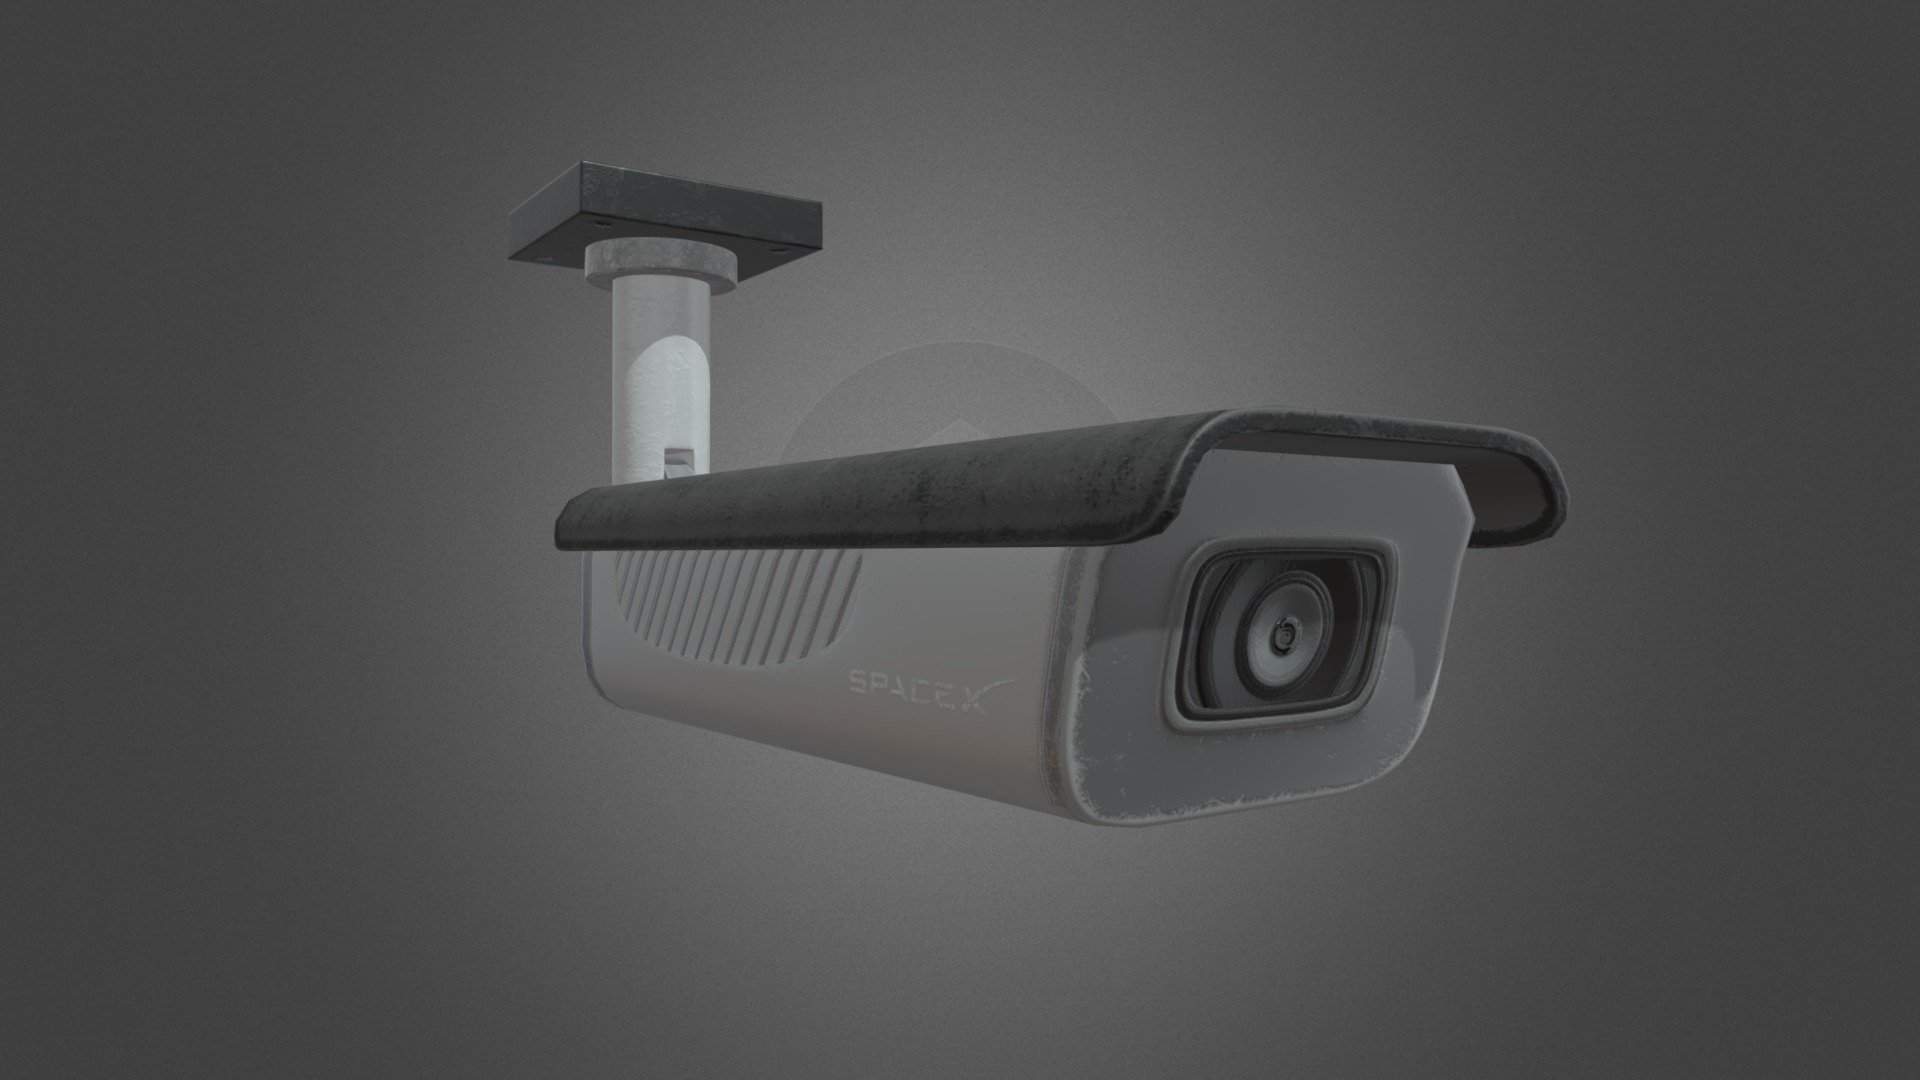 The security camera is a lowpoly prop for a game project I am currently working on at school. It's a highpoly model baked on a lowpoly model in Substance Painter and textured with the same program. I modeled both objects in 3Ds Max 3d model